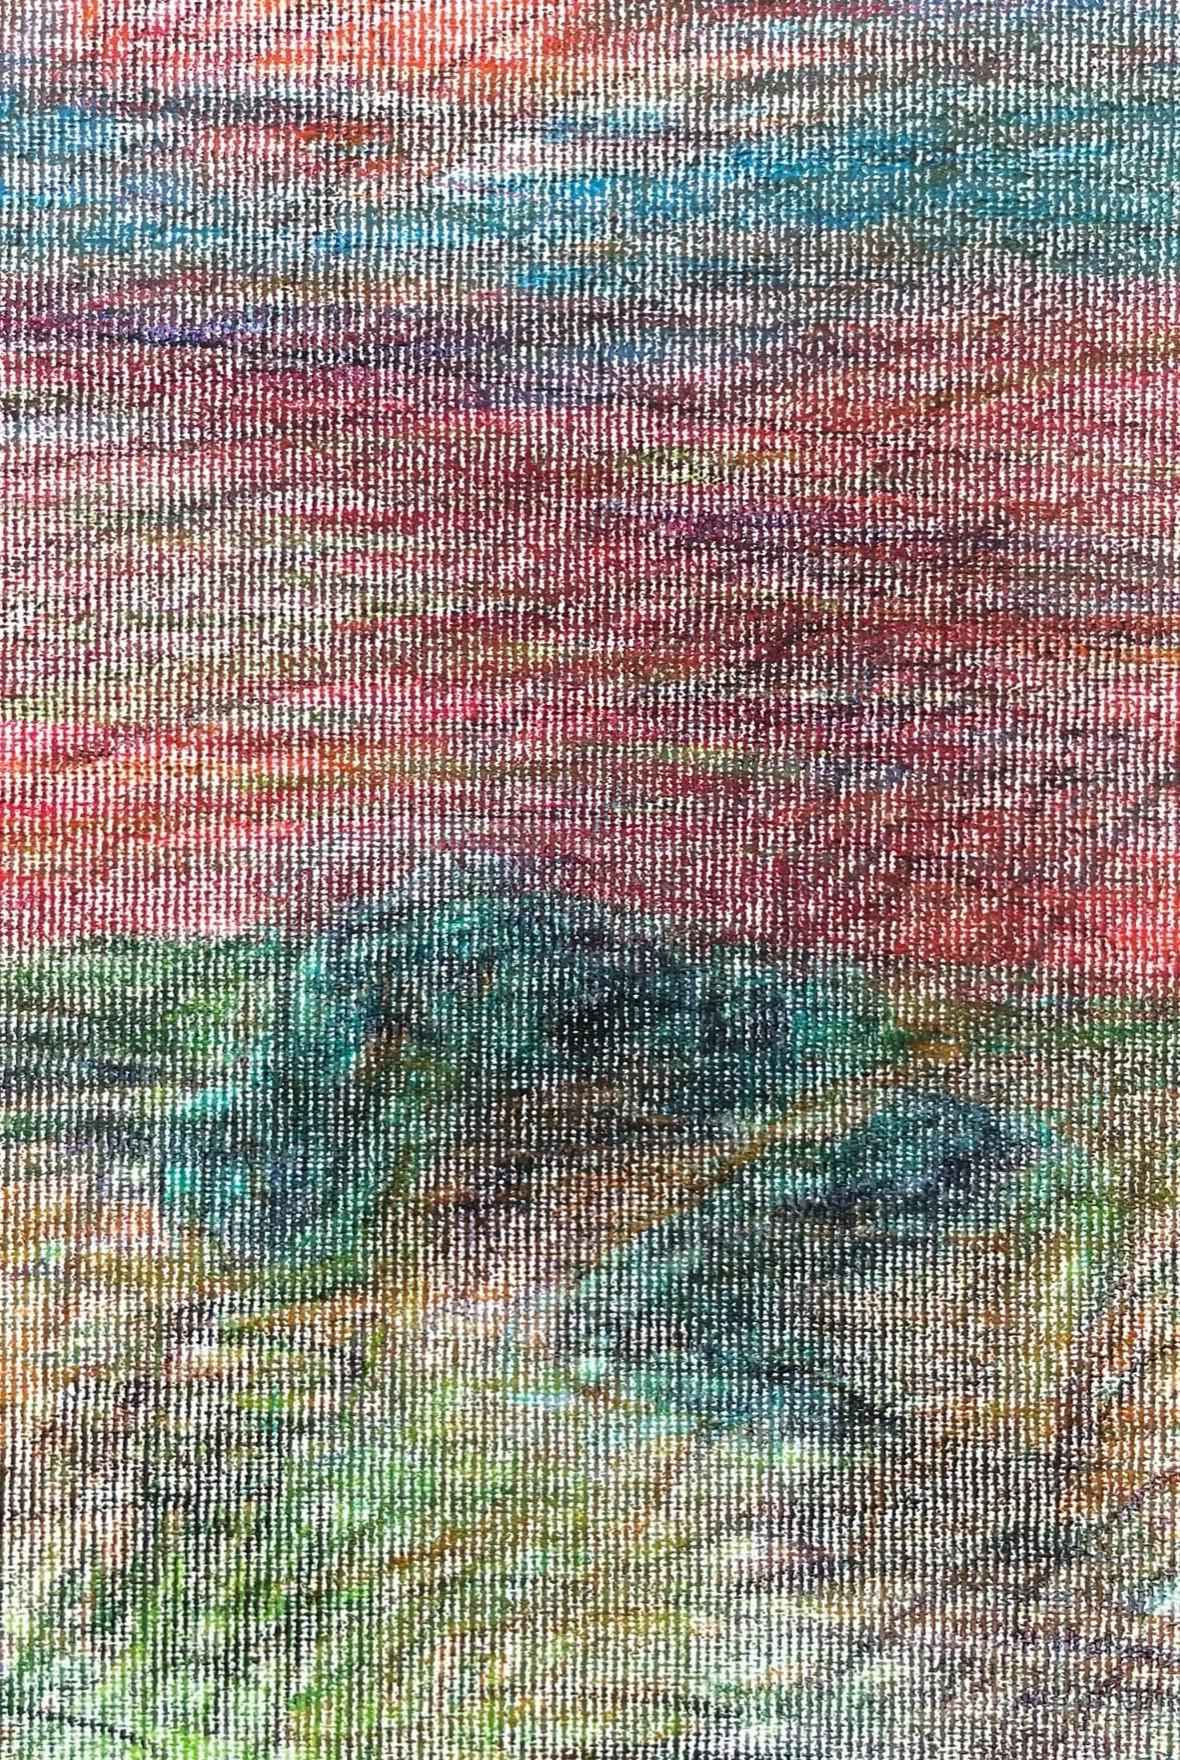 Body in the Field #13, 2022
coloured pencils on canvas
9.84 H x 6.29 W in.
25 H x 16 W cm
Signed and dated on reverse

Zsolt Berszán embodies in his works the dissolution of the human body through the prism of the fragment, the body in pieces, and